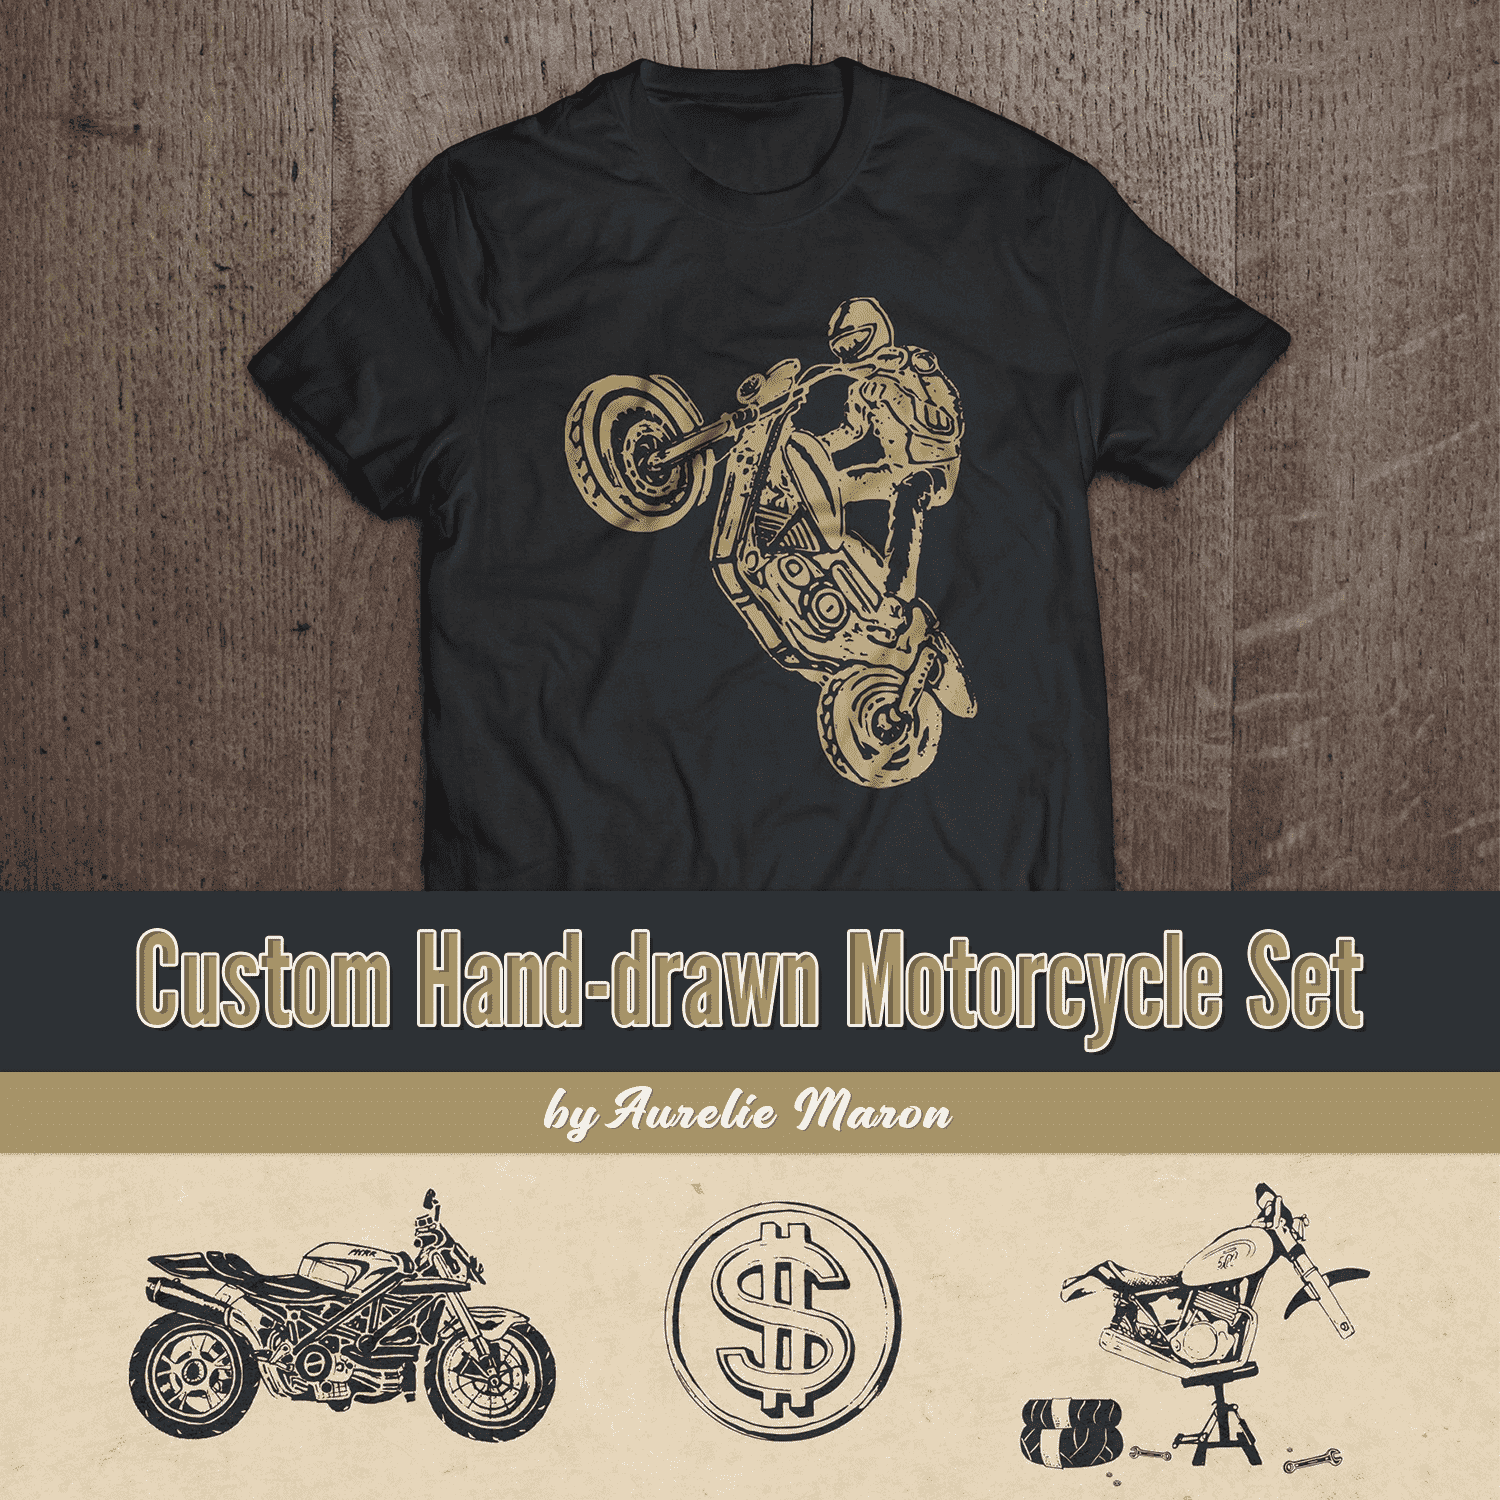 Detailed drawing of a motorcycle on a black T-shirt.